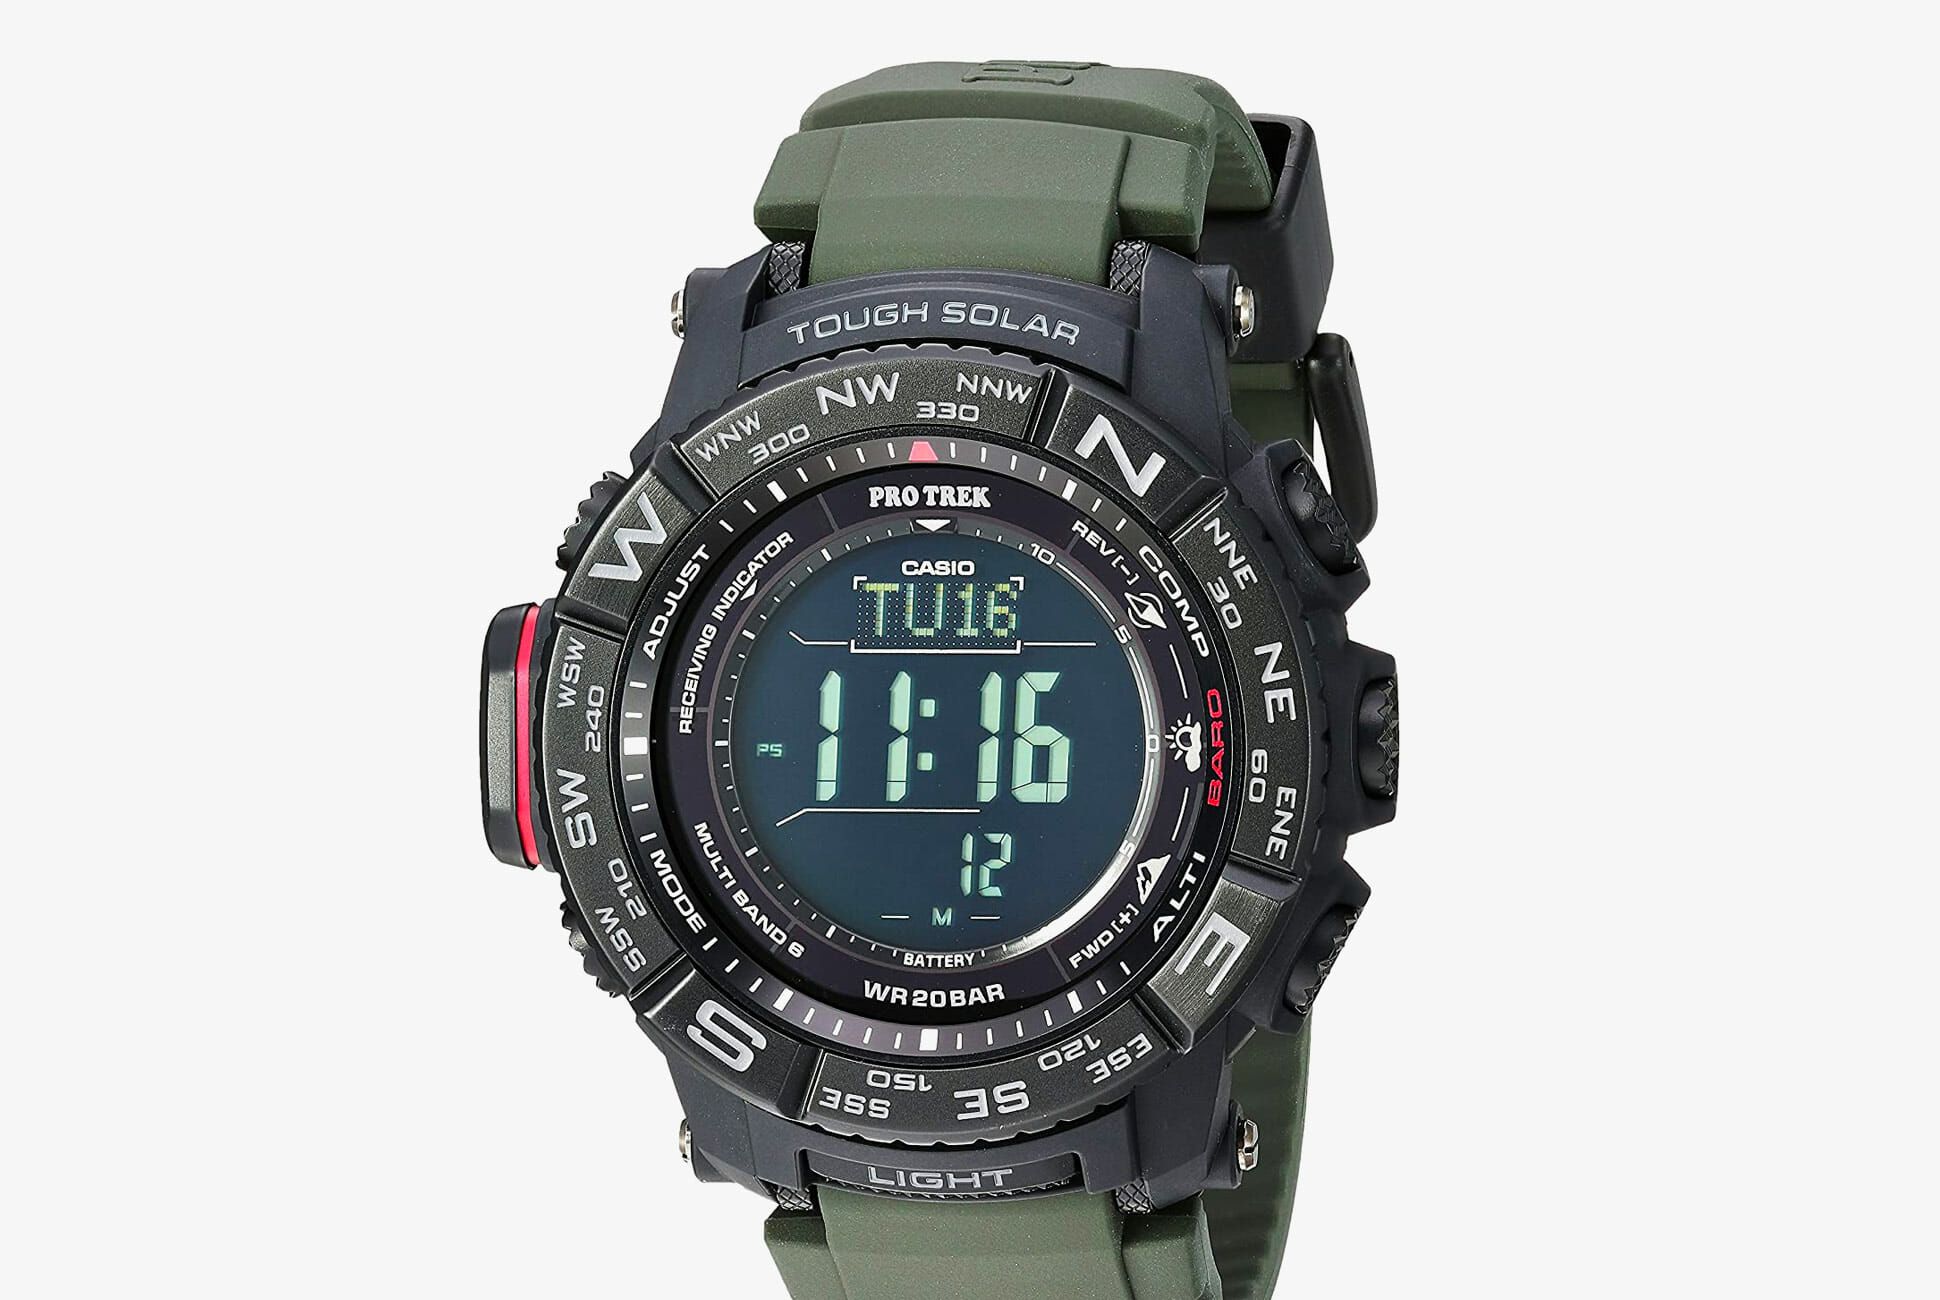 Get This Heavy-Duty Outdoor Watch for $83 off